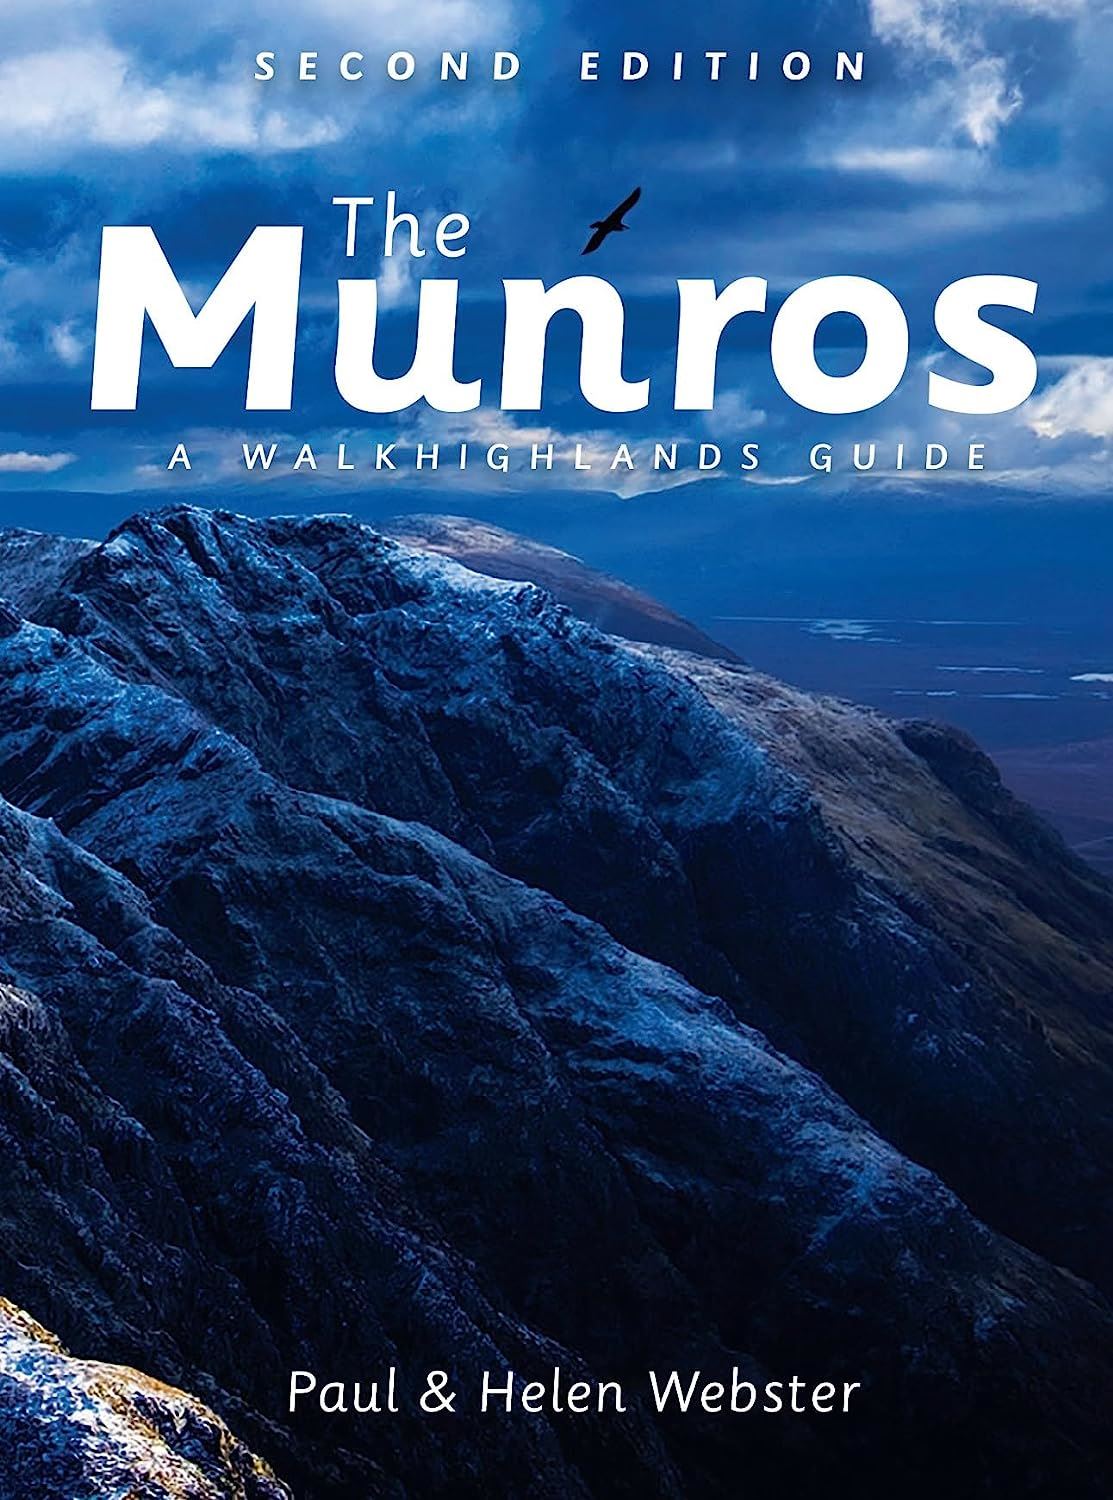 The Munros - A Walk Highlands Guide (2nd Edition)